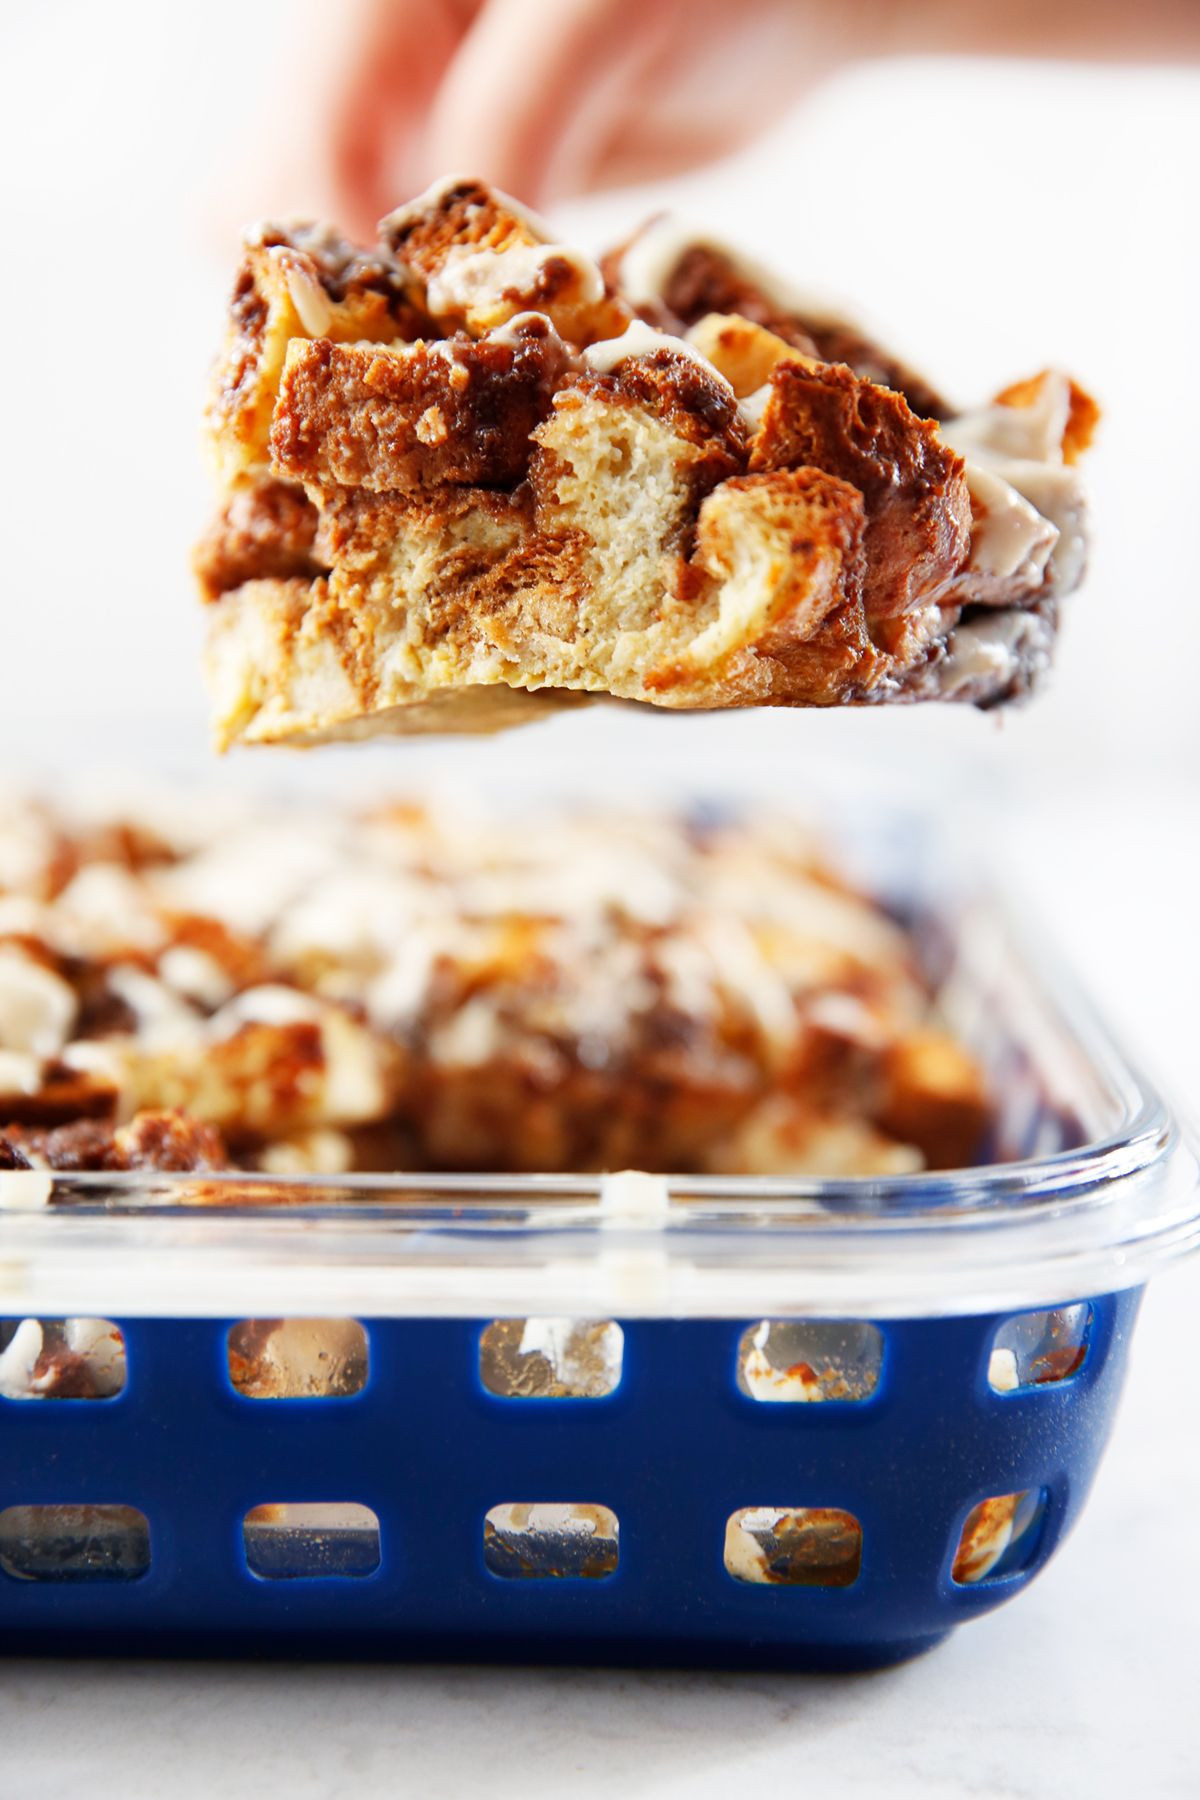 Overnight Cinnamon Roll French Toast Casserole
 This Overnight Cinnamon Roll French Toast Casserole is the